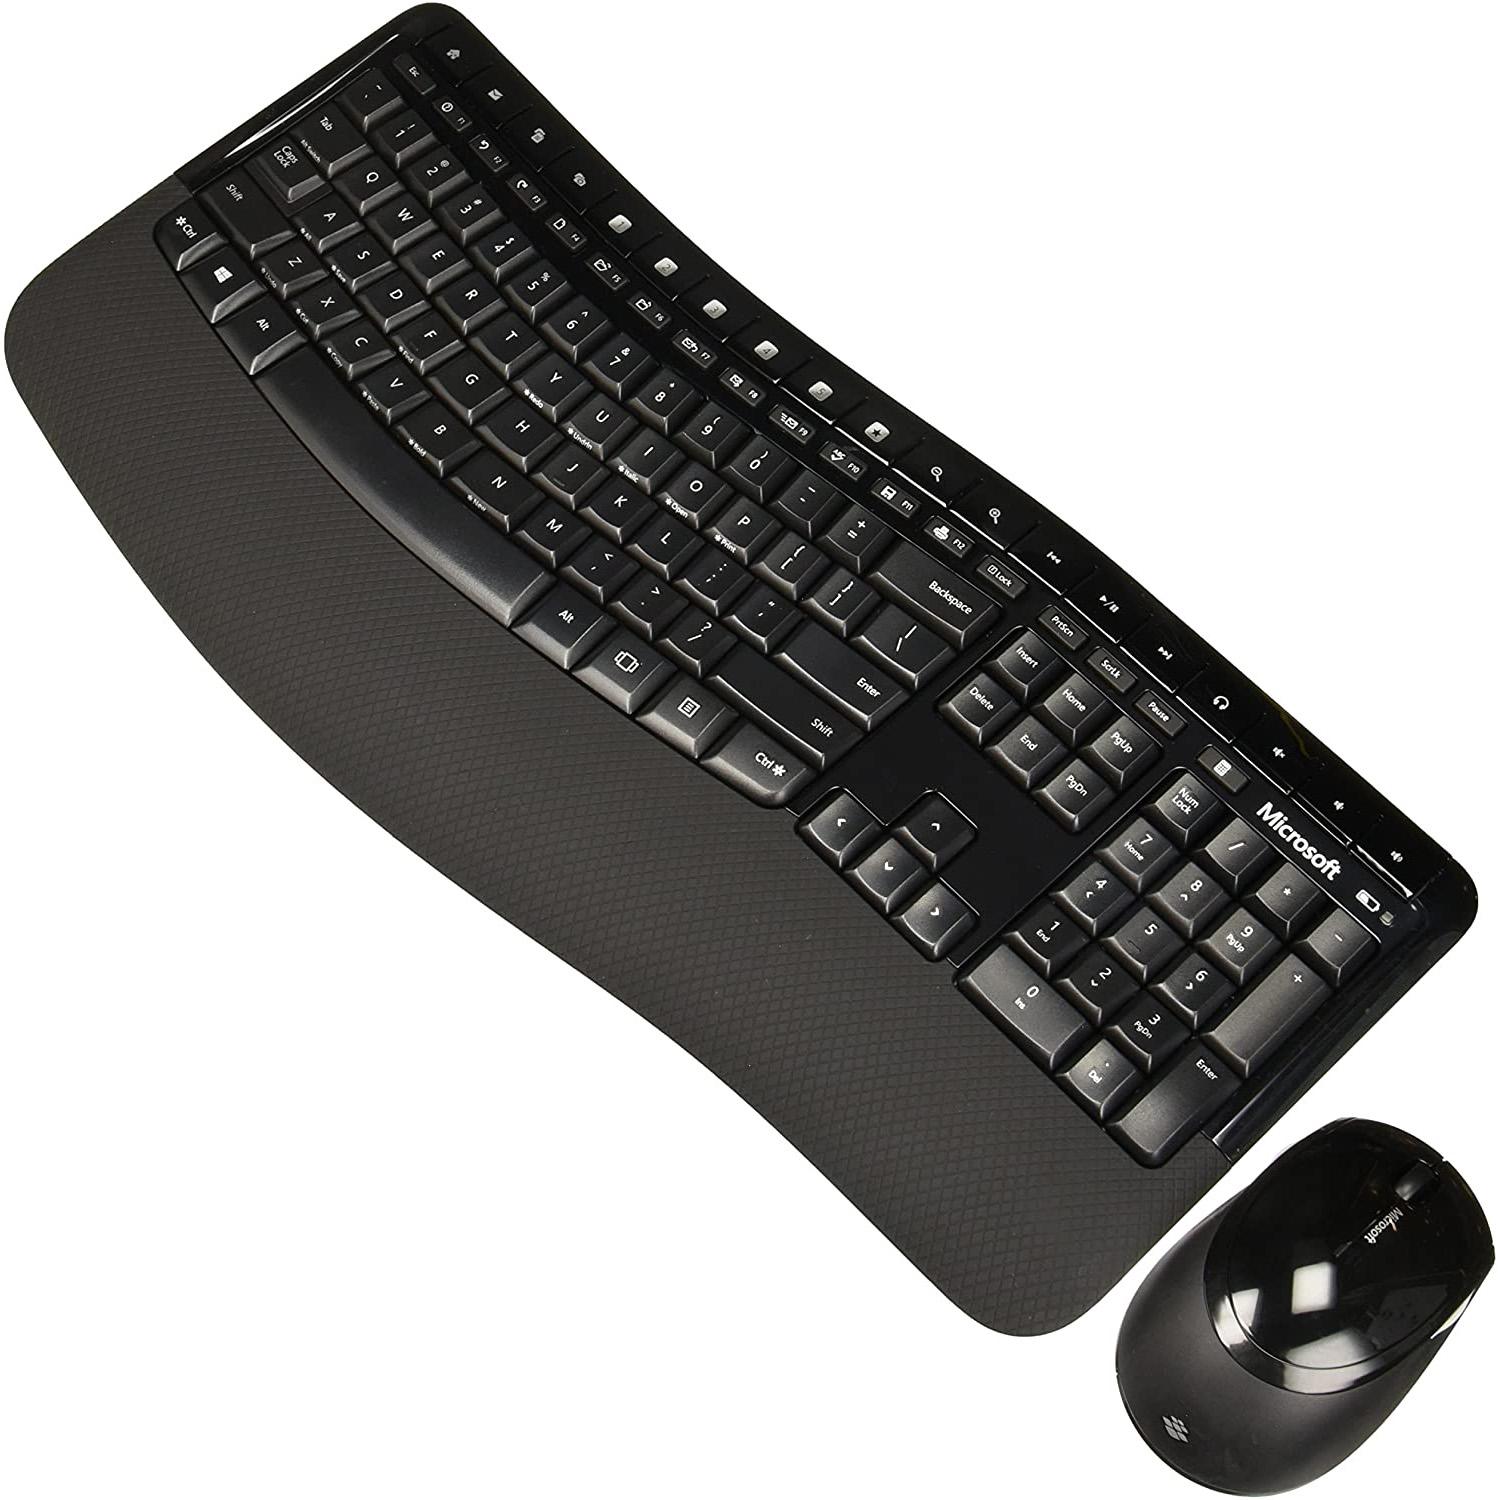 Microsoft Comfort Desktop 5050 Keyboard and Mouse for $19.34 Shipped